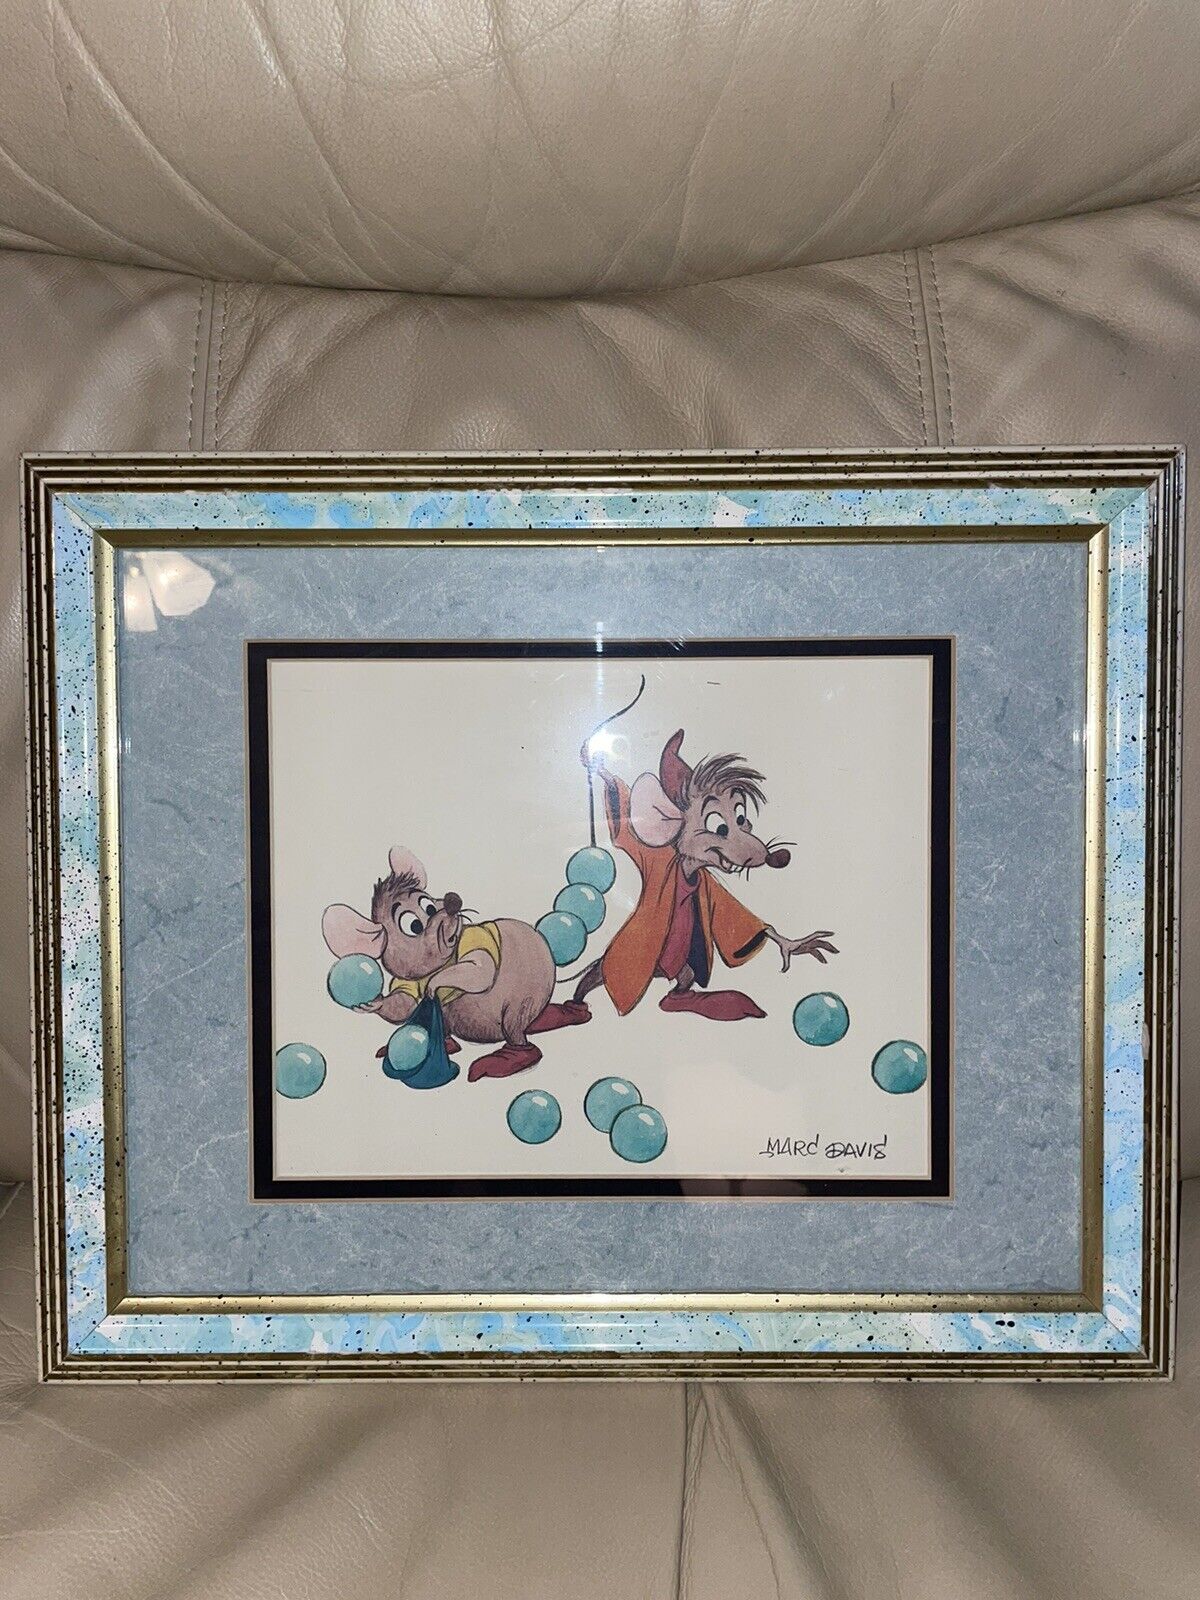 Disney Cinderella Gus & Jaq Lithograph Signed Marc Davis Matted and Framed.